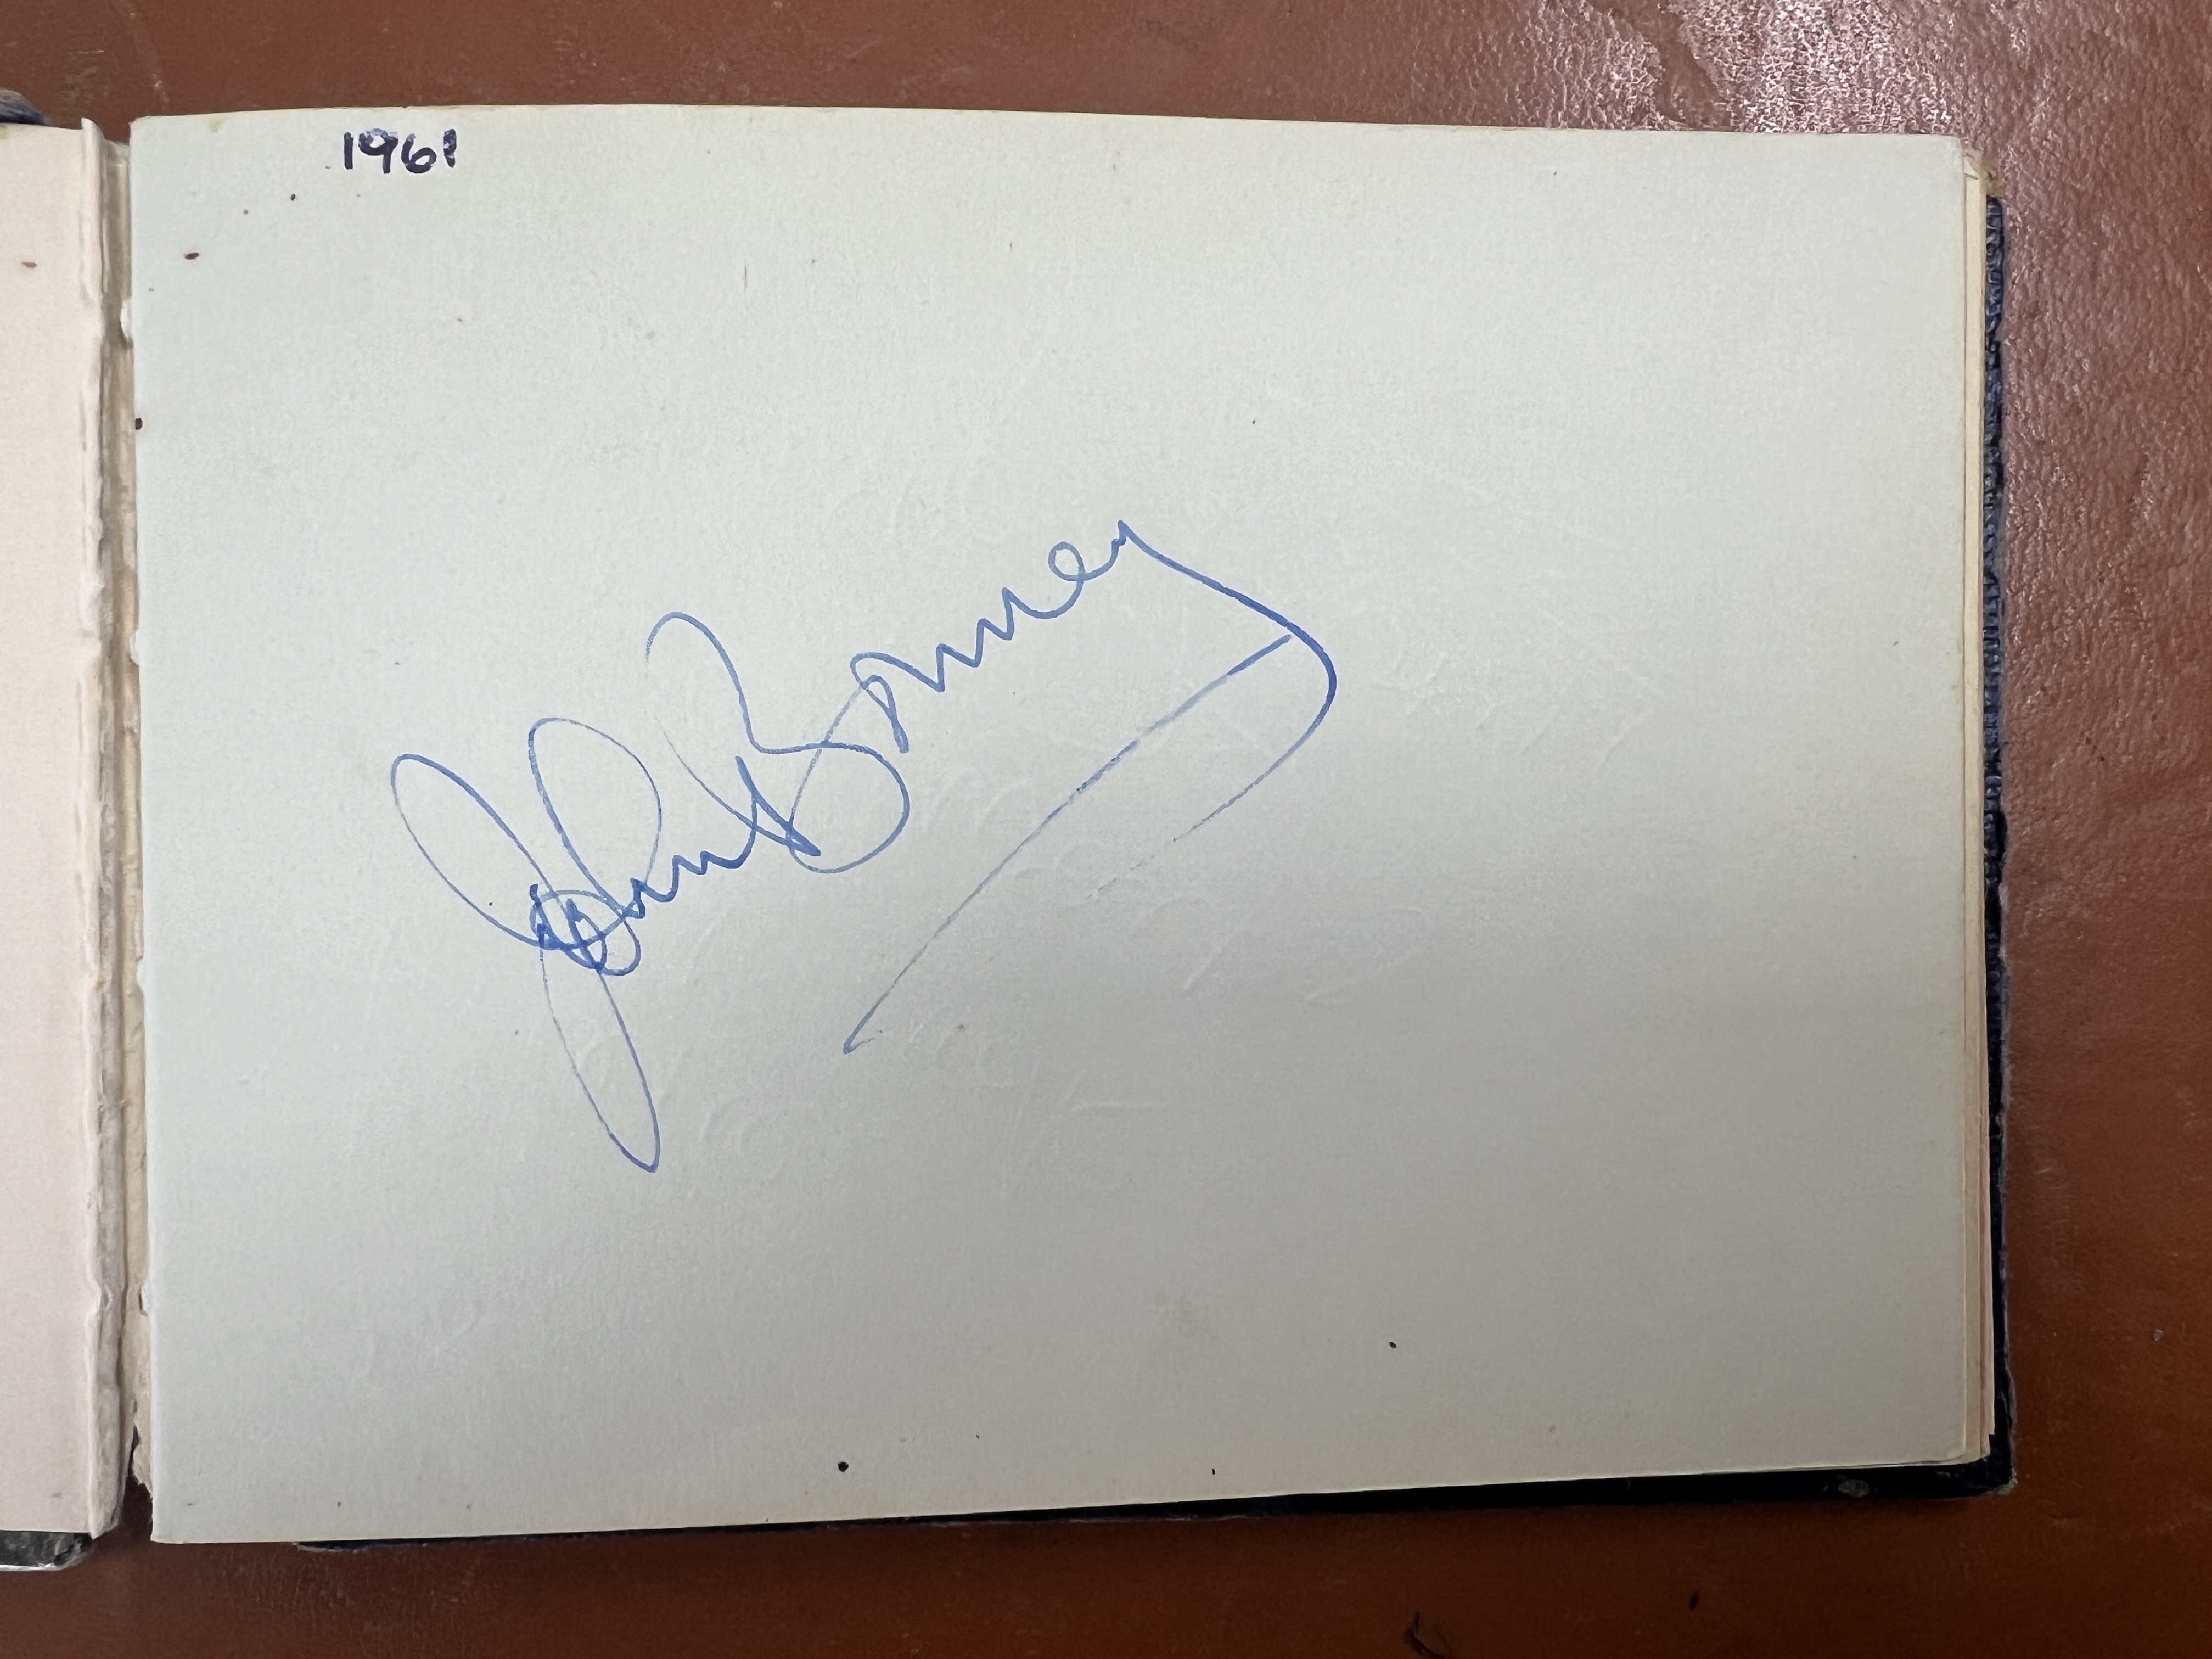 A 1960's autograph album containing autographs of various celebrities including Cliff Richard, - Image 37 of 37